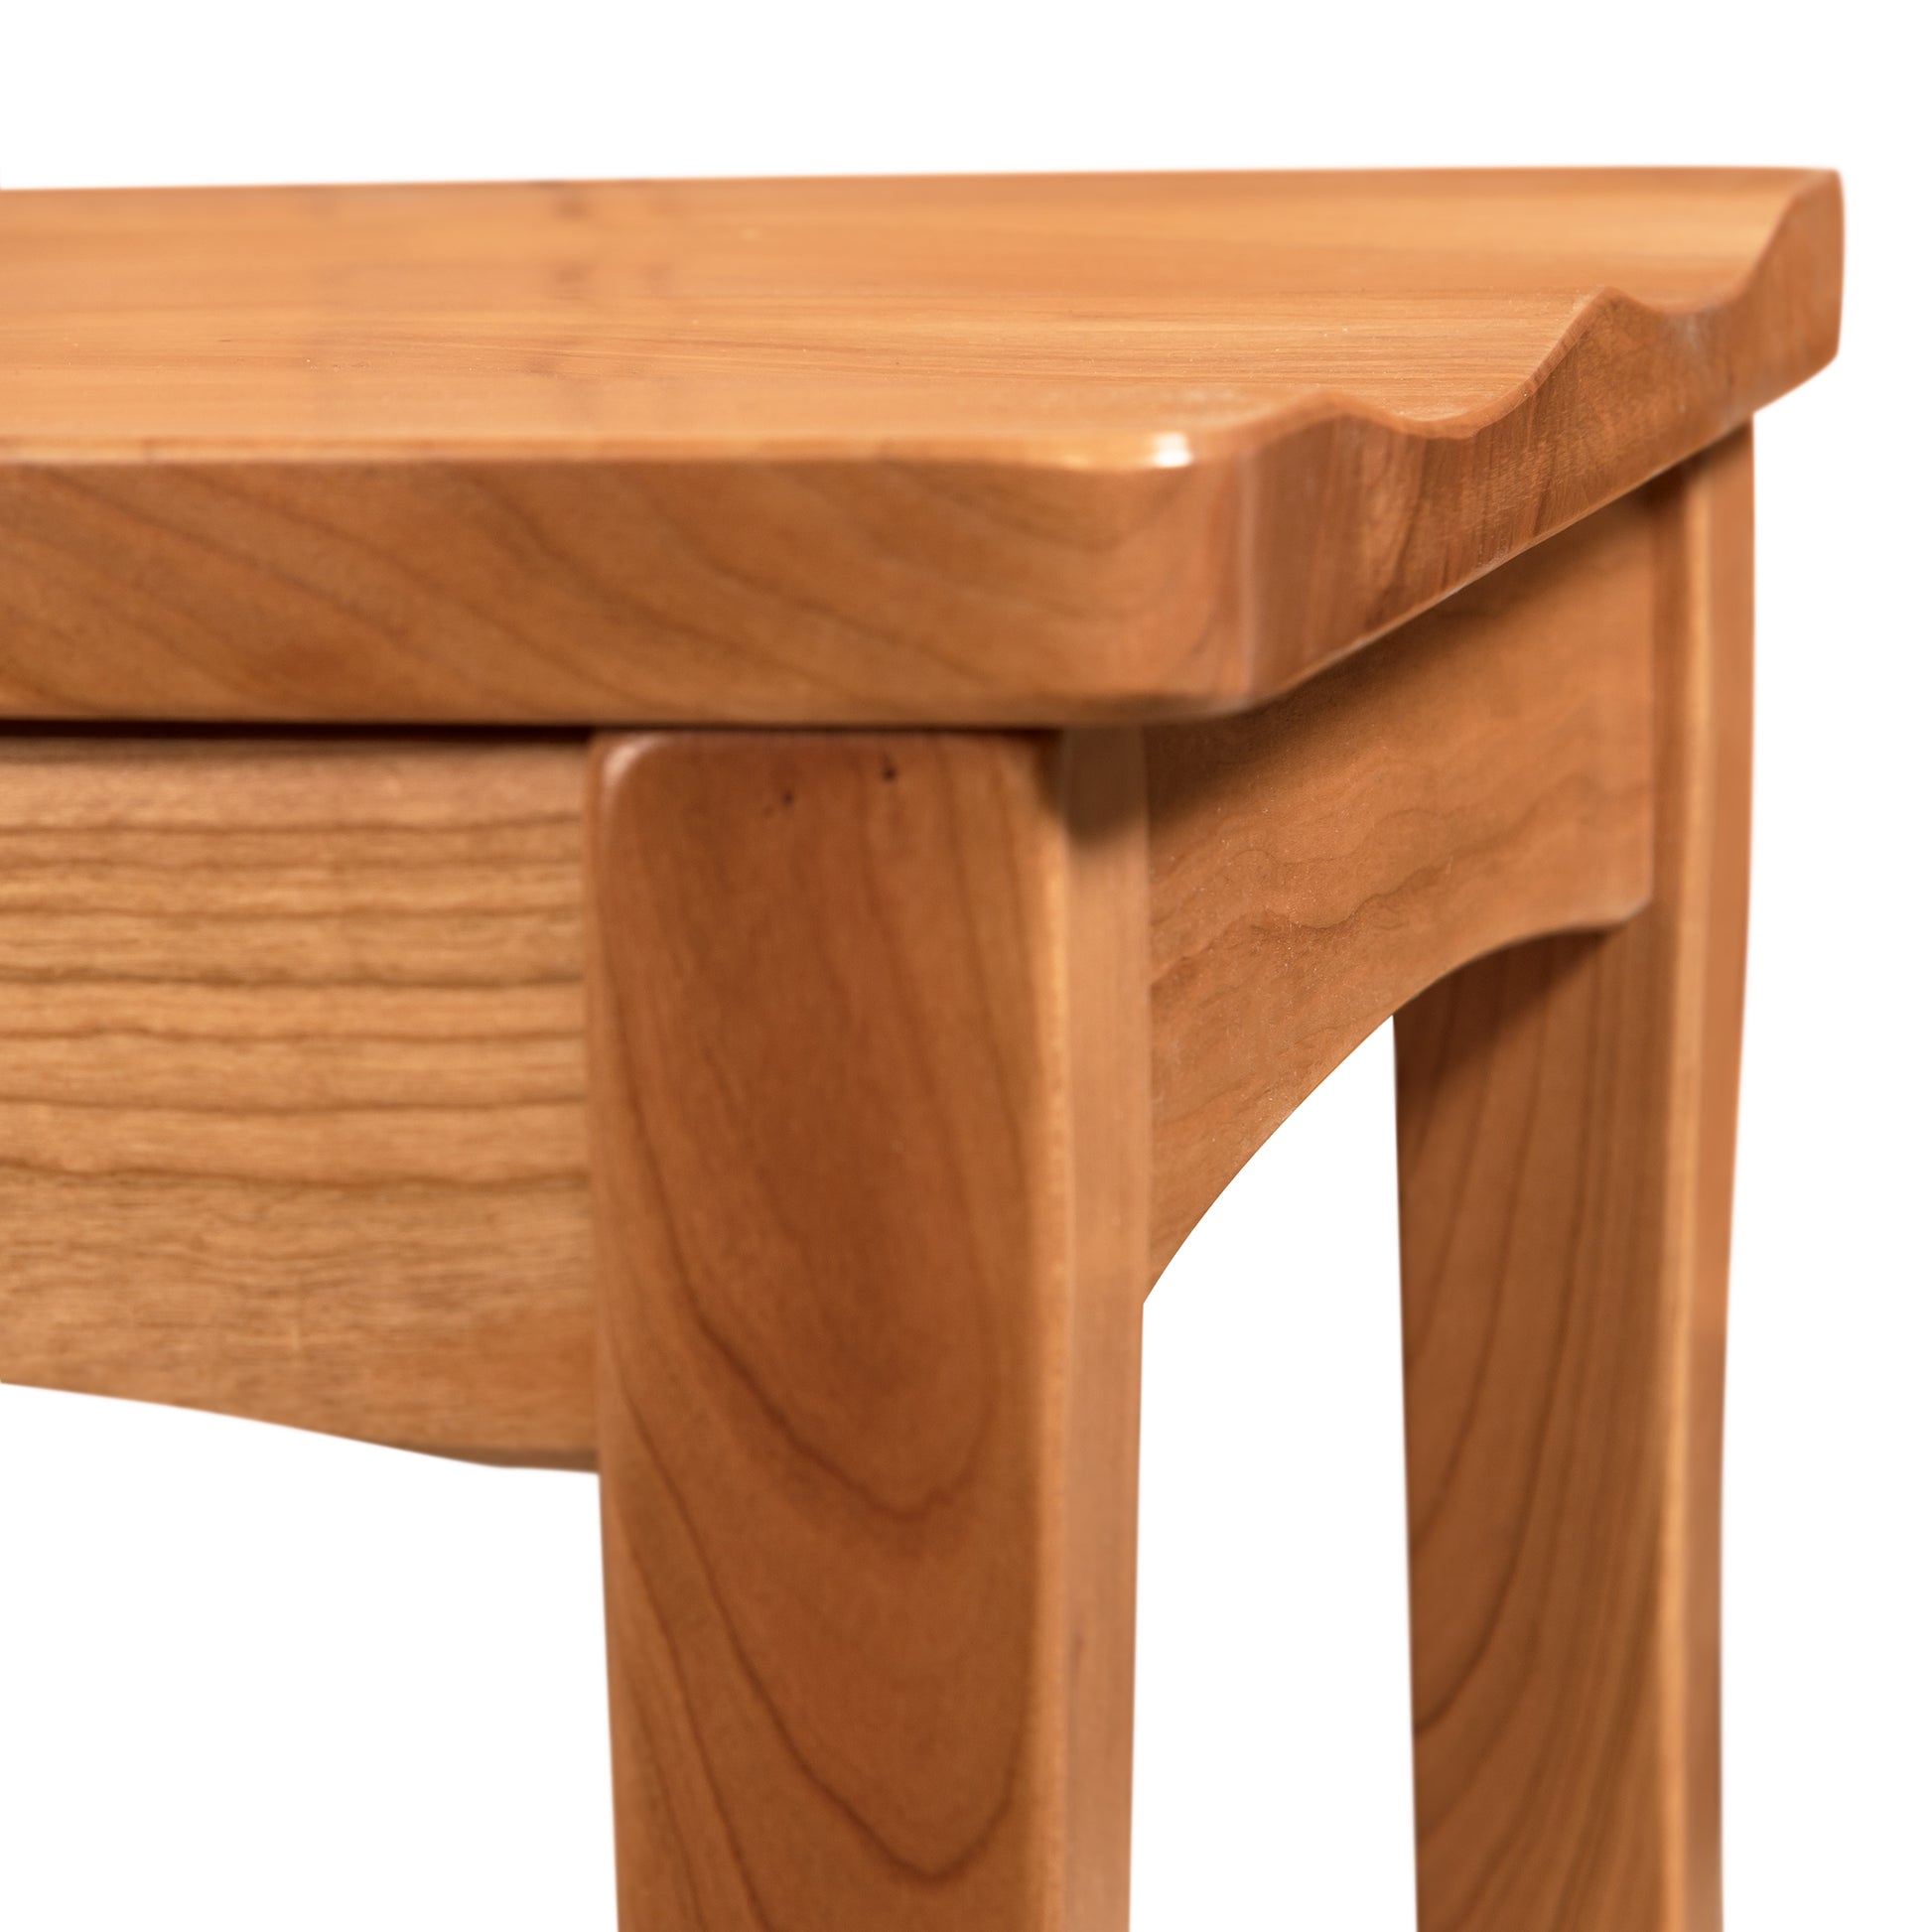 A close up image of a wooden table.